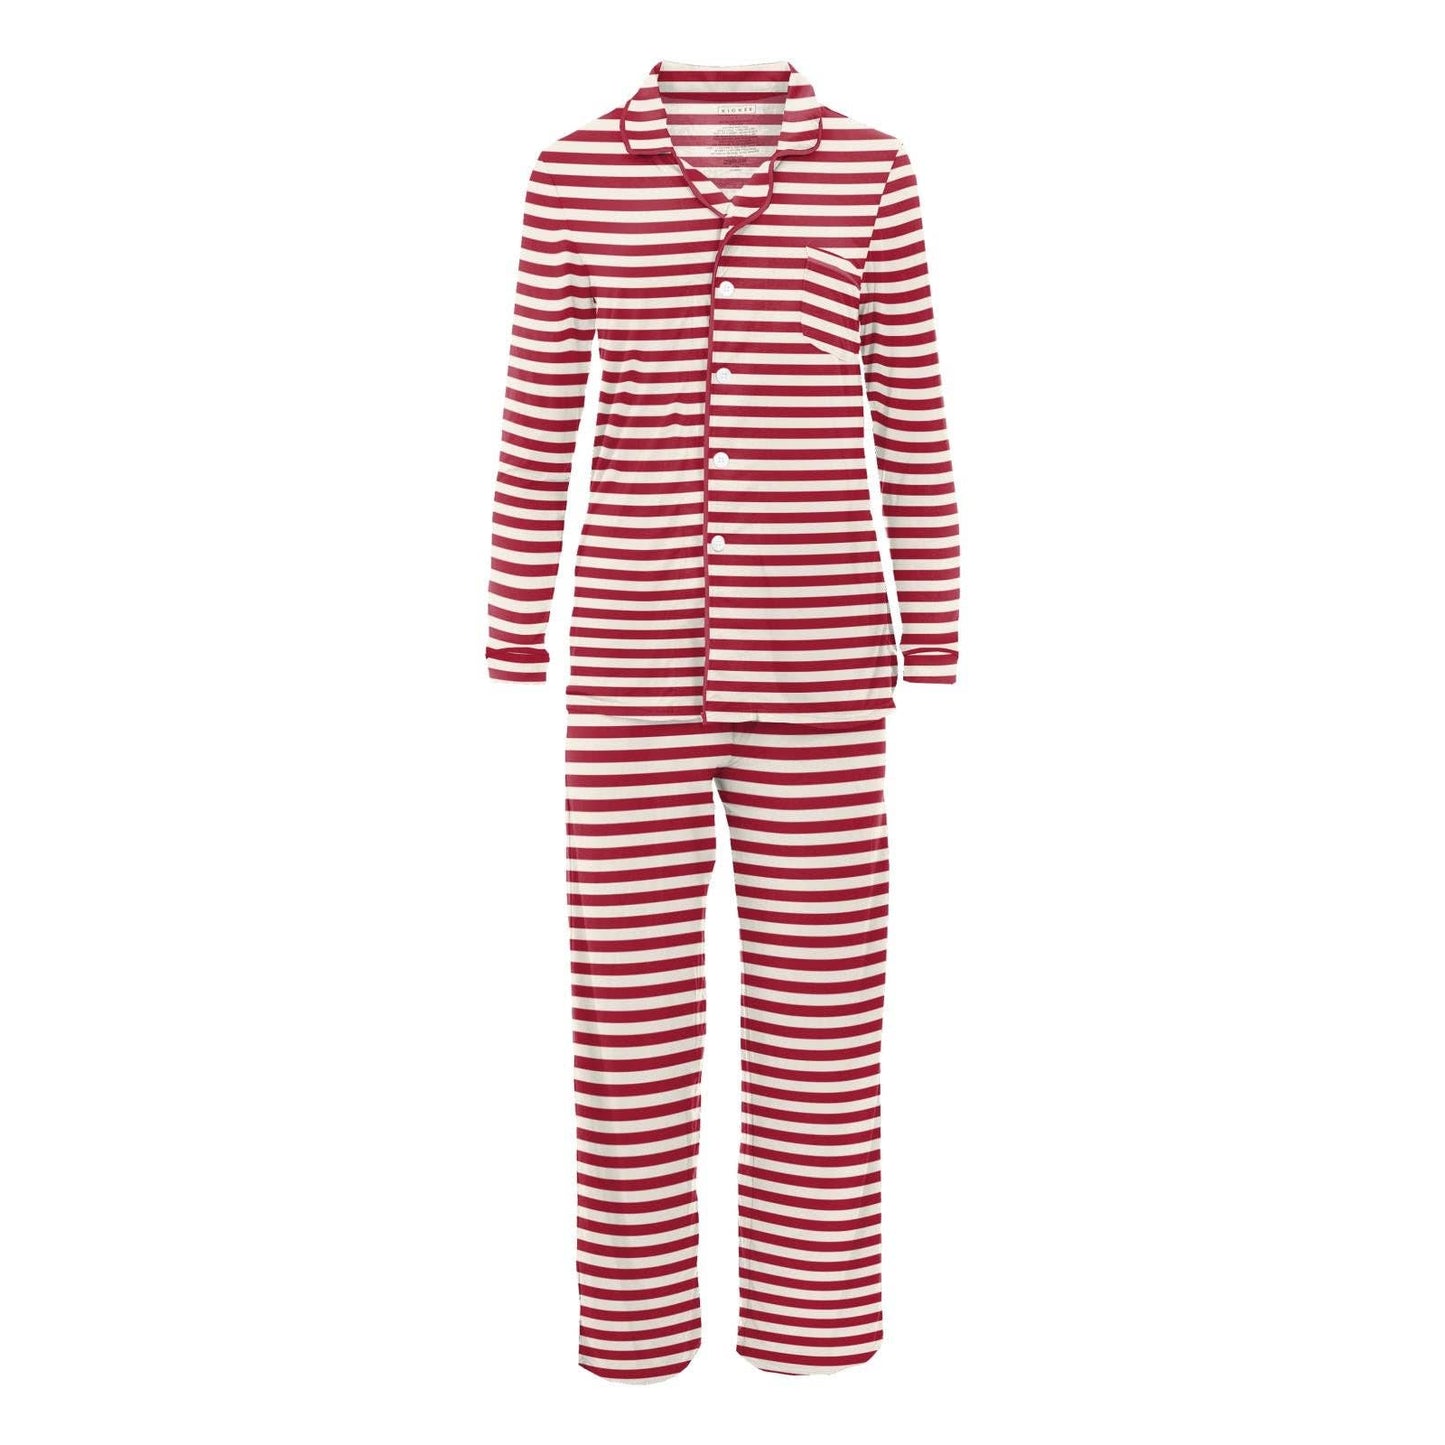 Women's Long Sleeve Collared PJ Set in Classic Candy Cane: XL